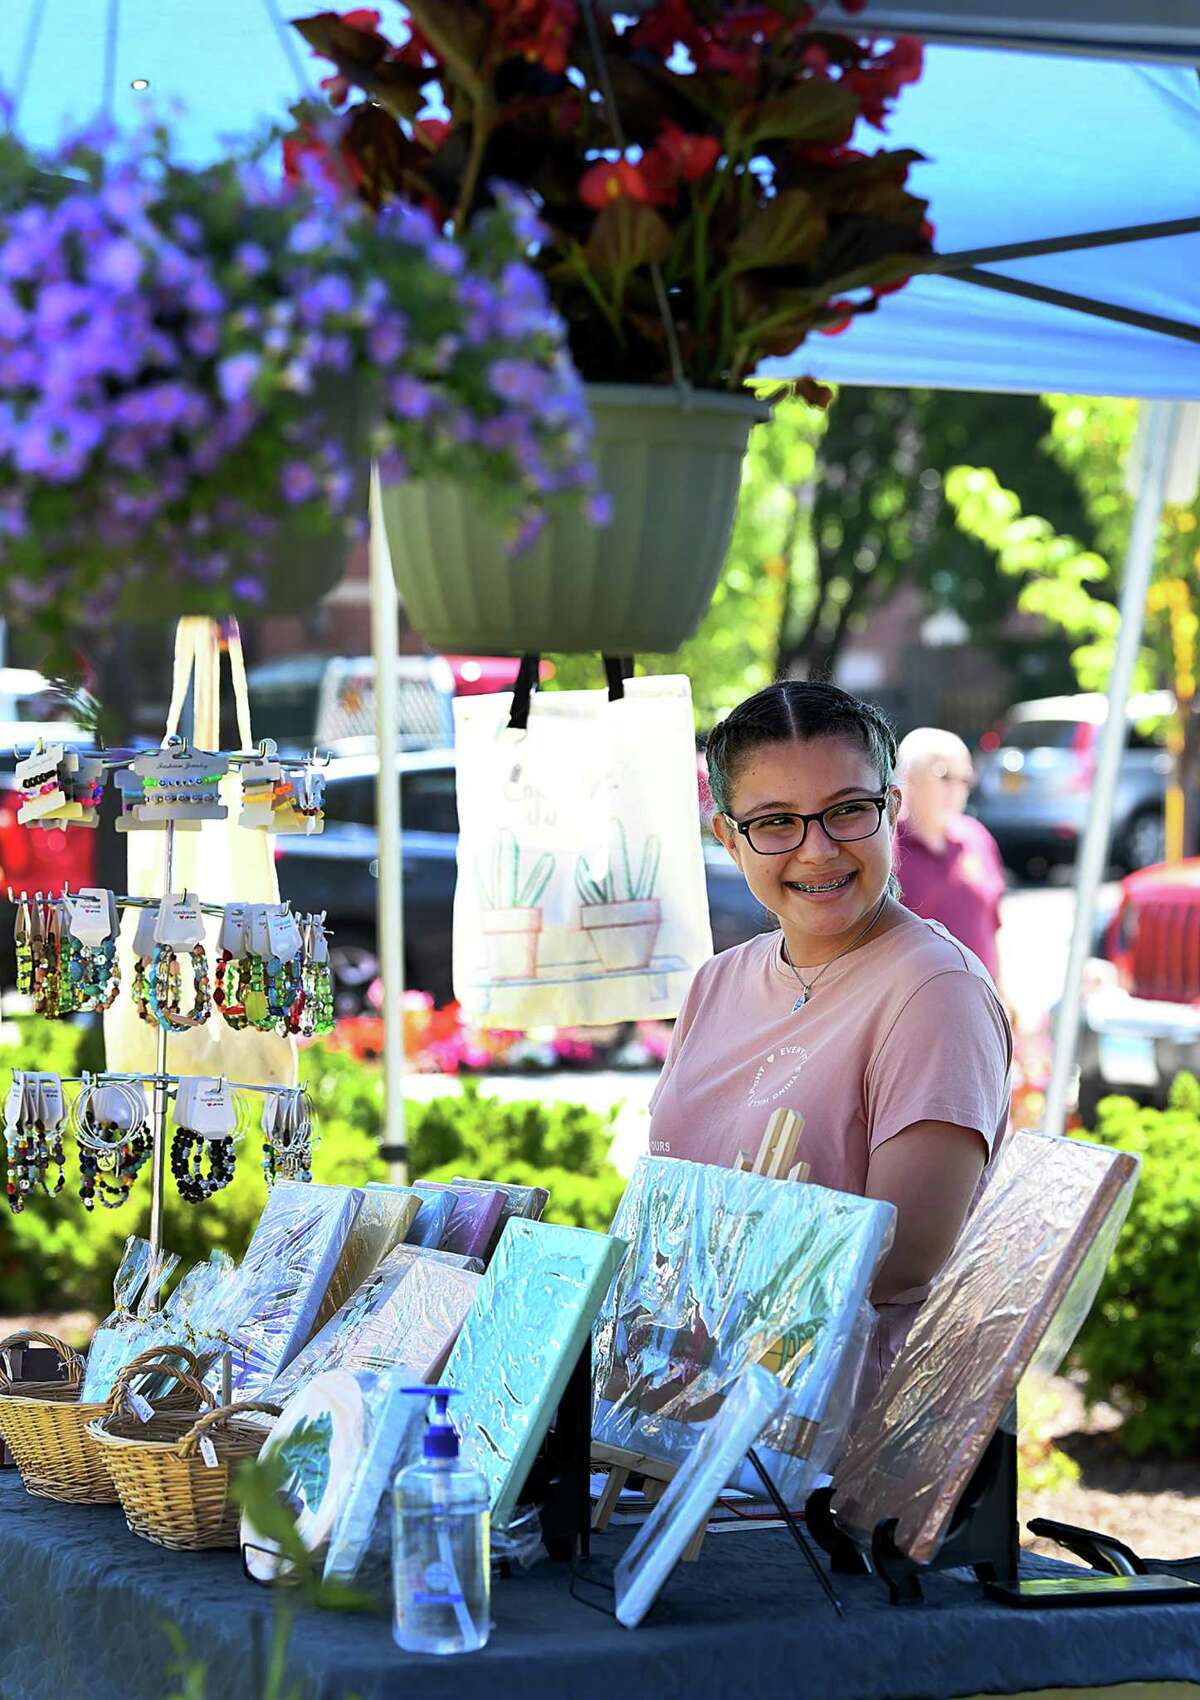 Dayana Flores of FG Arts & Crafts mans her booth at the Danbury Farmers Market on the CityCenter Green, Saturday, June 25, 2022.